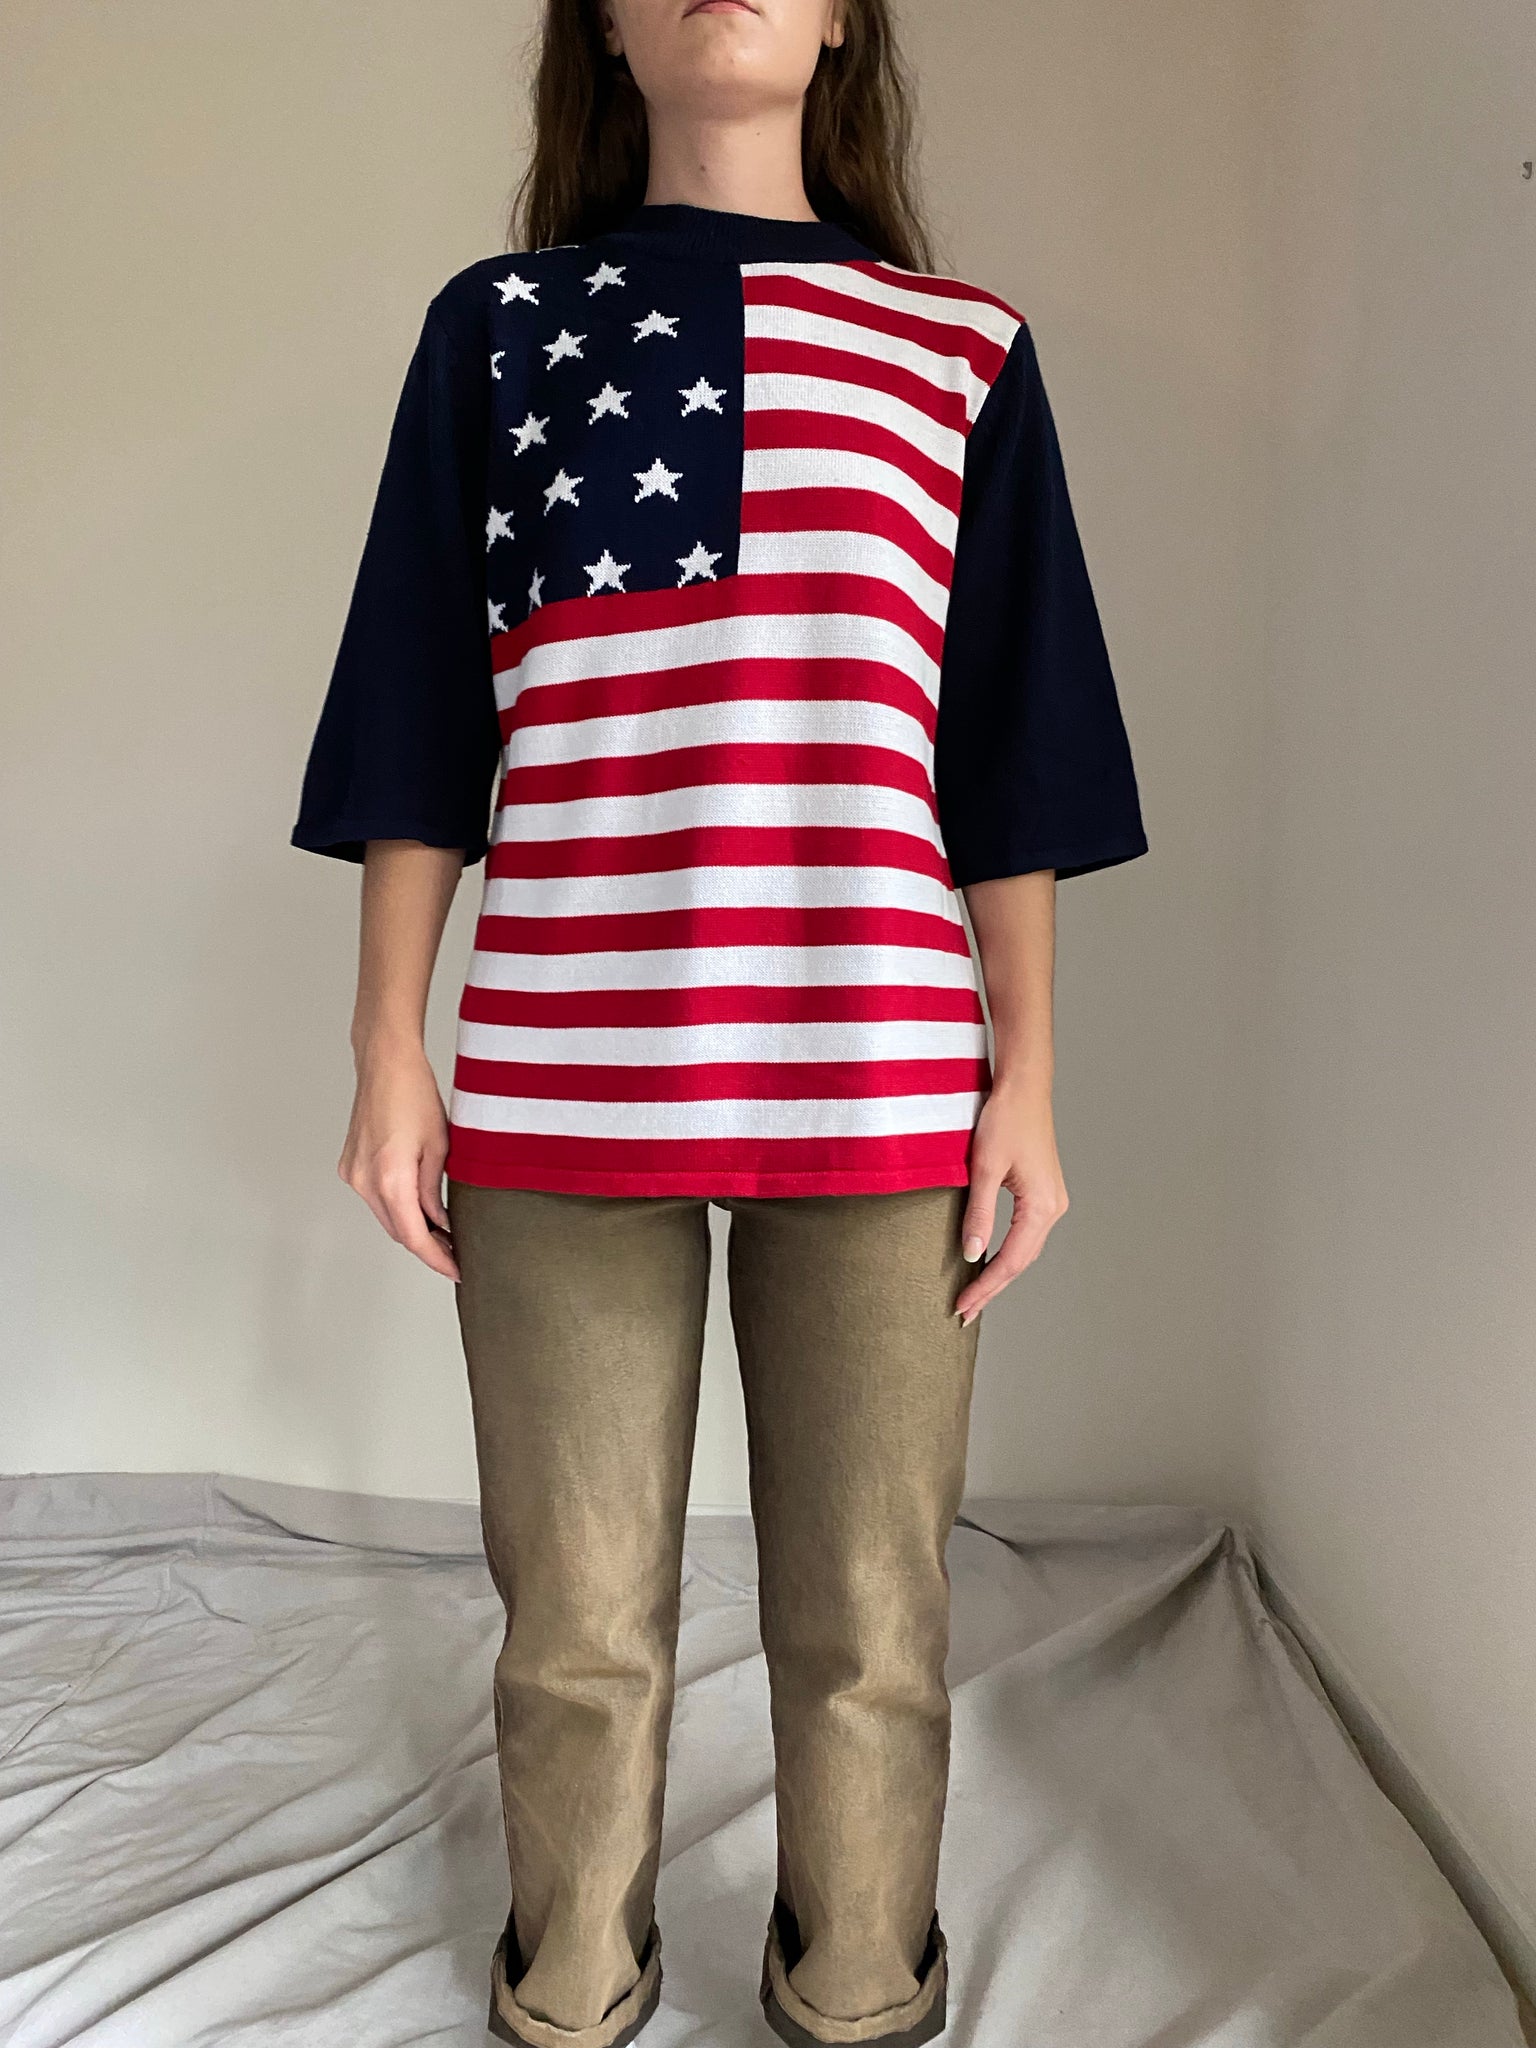 80s Sideffects American Flag Sweater (Size M)